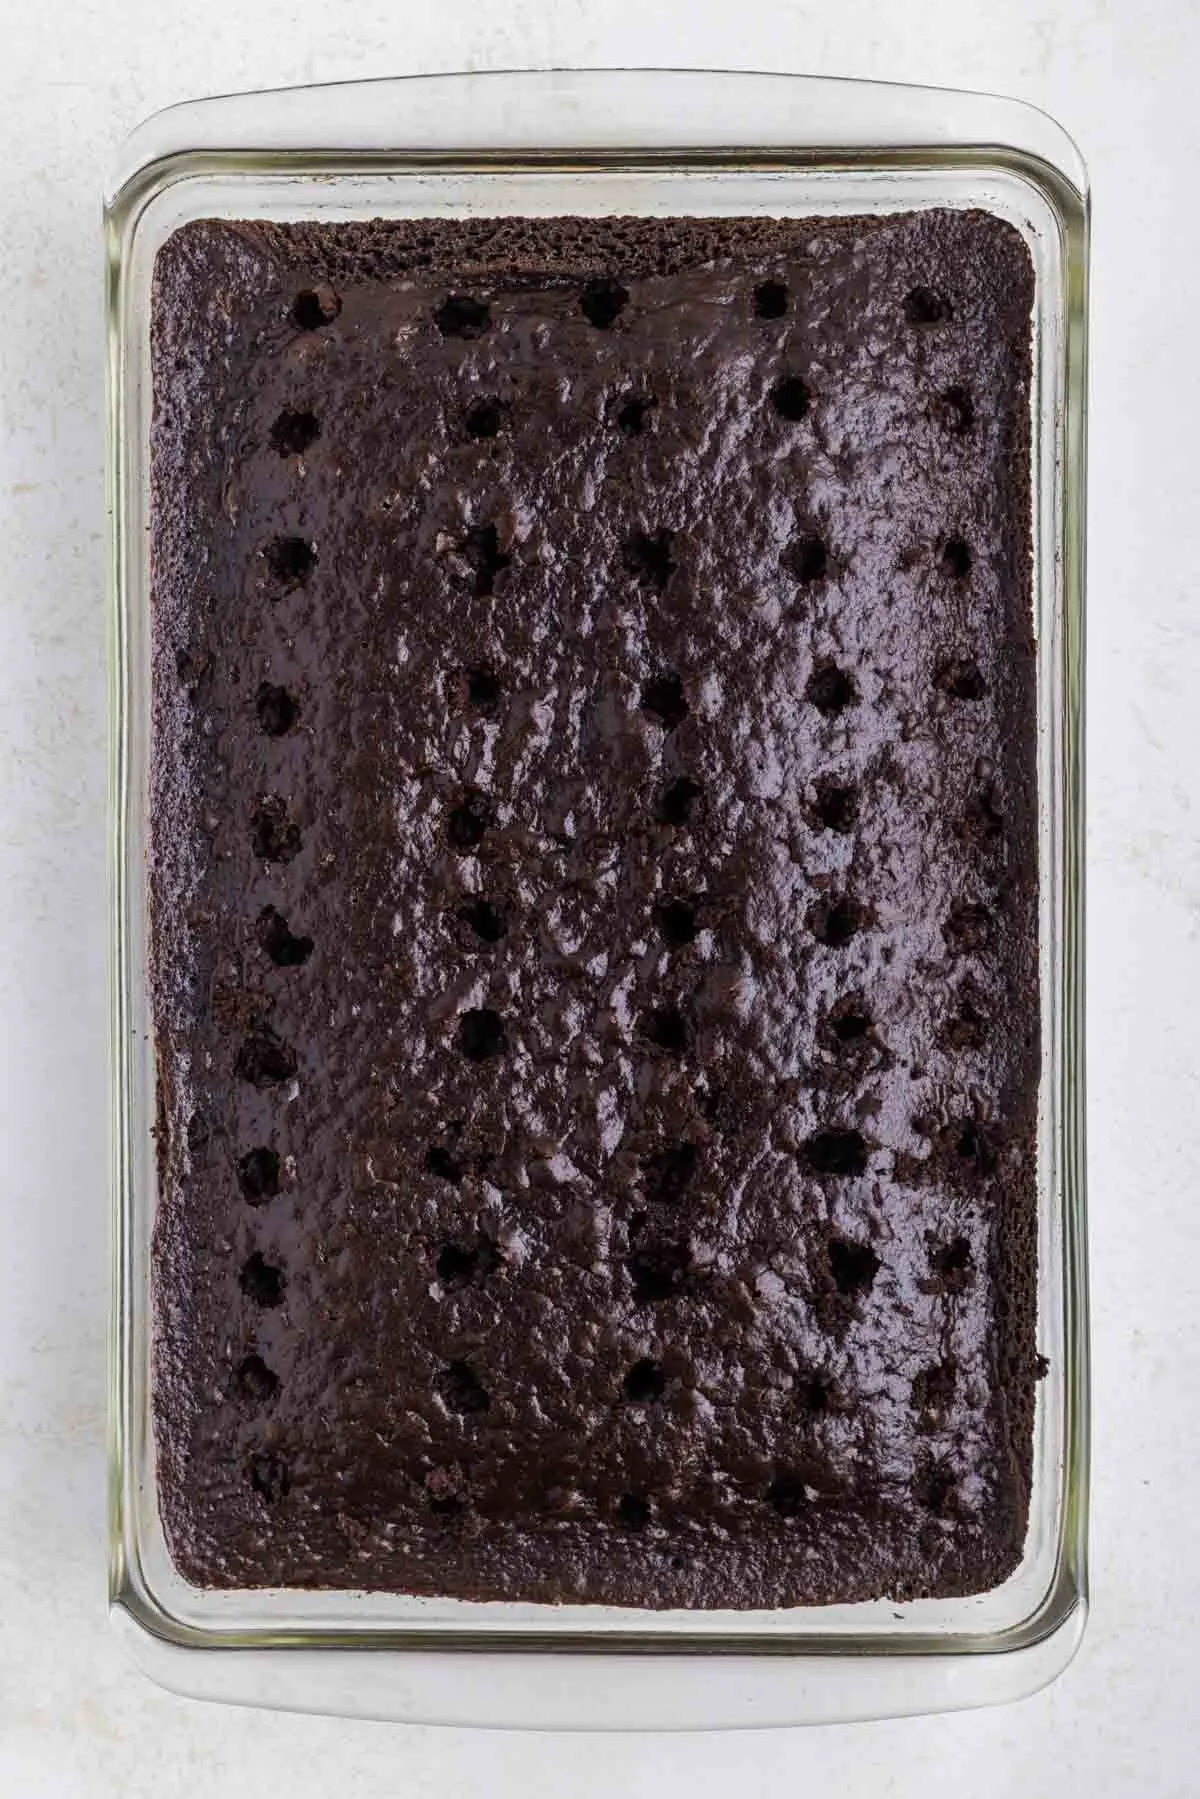 holes poked in chocolate cake in pan